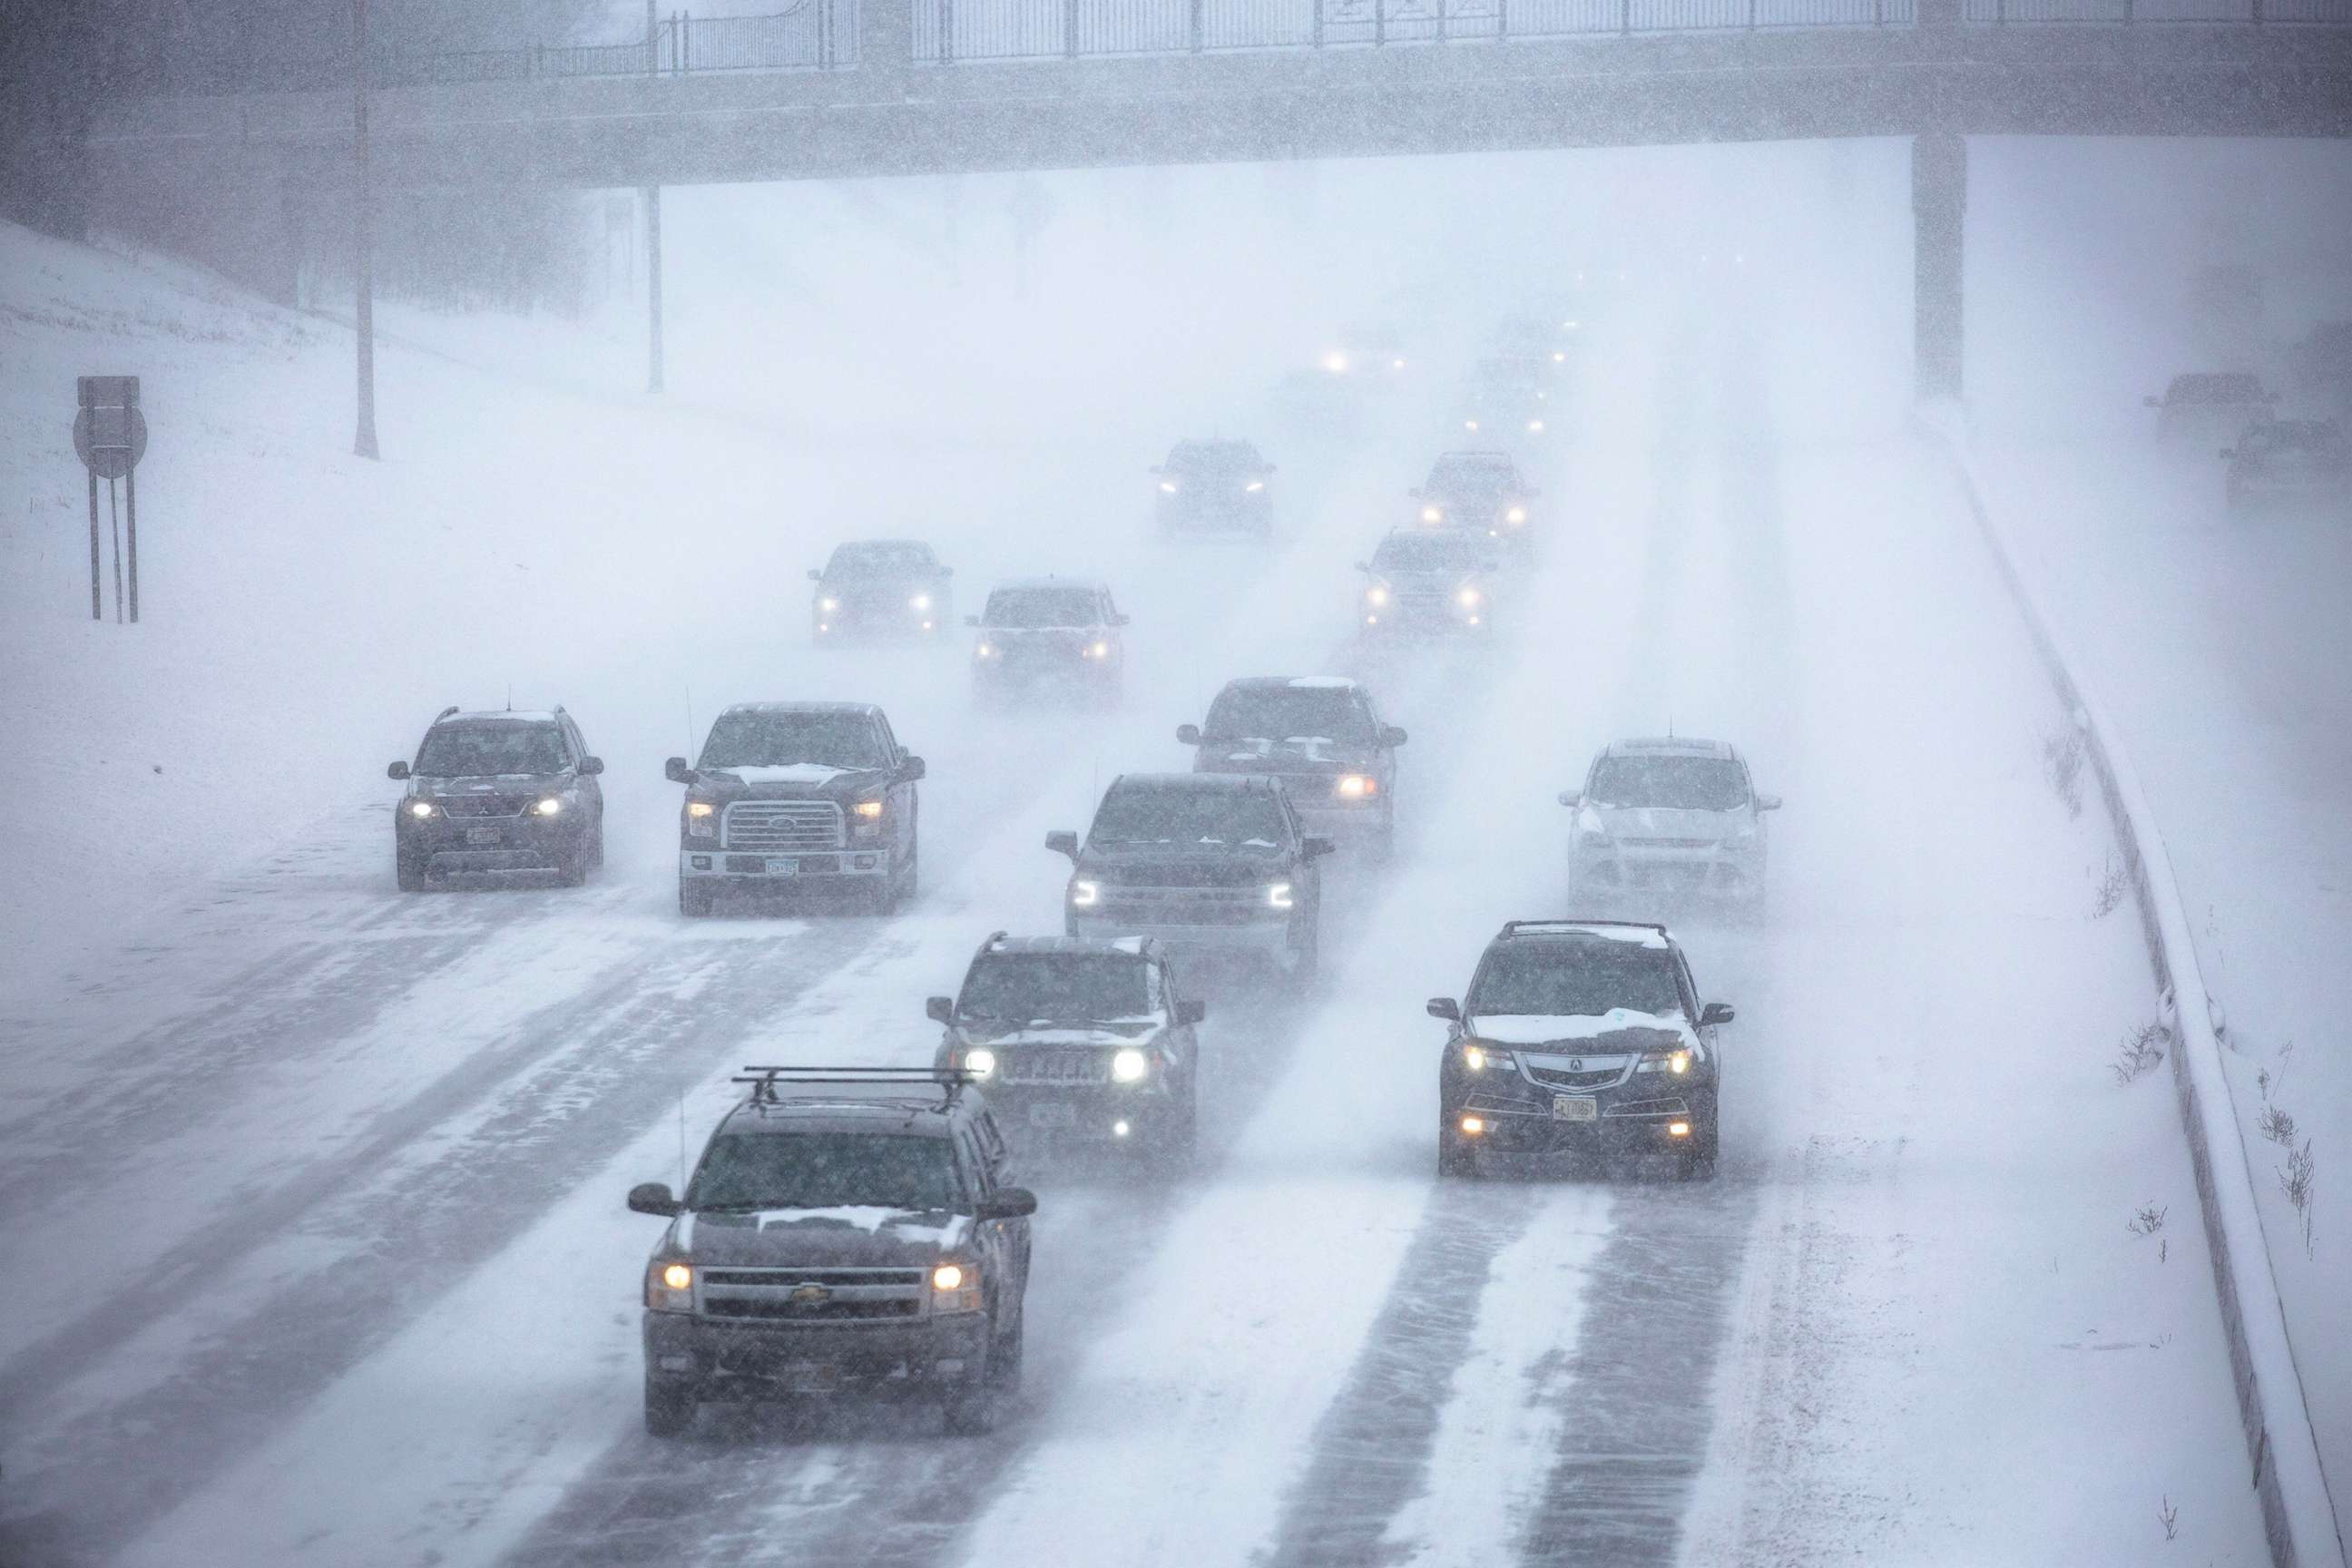 PHOTO: Vehicles are seen during a heavy snowstorm on a highway in St. Paul, Minnesota, Feb. 22, 2022.